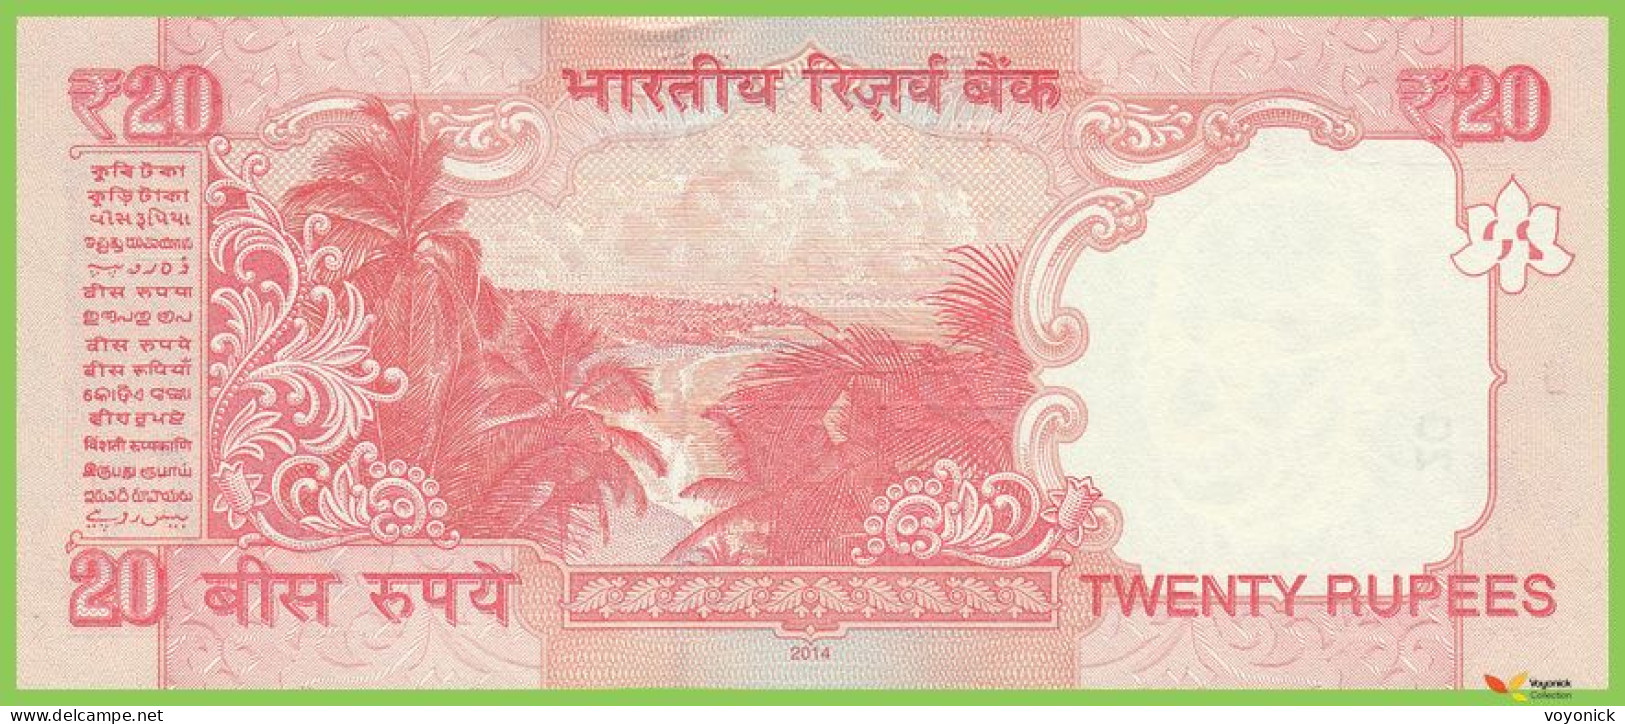 Voyo INDIA 20 Rupees 2014 P103g B287c1 99A W/o Letter UNC - India